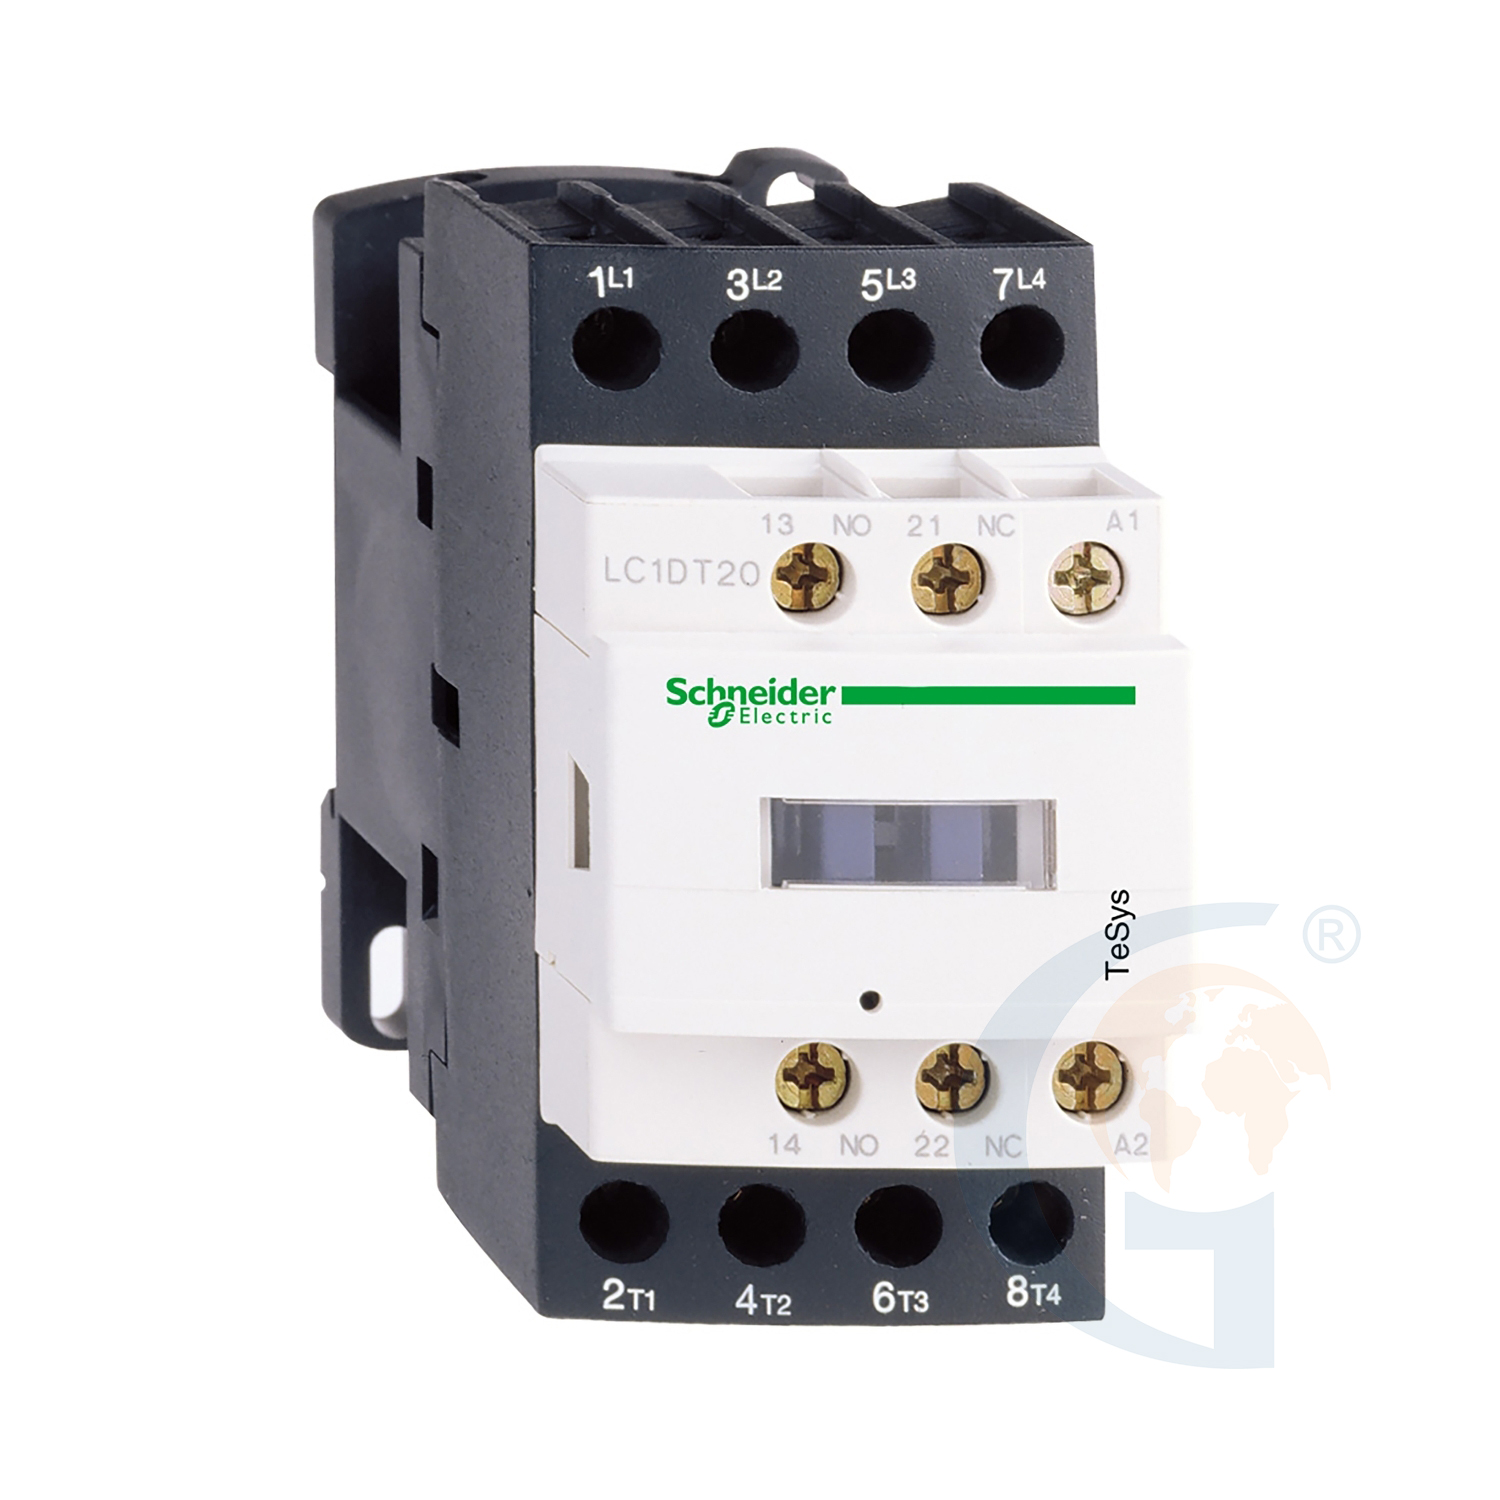 Schneider Electric LC1DT25SL TeSys D contactor – 4P(4 NO) – AC-1 – <= 440 V 25 A - 72 V DC low cons coil https://gesrepair.com/wp-content/uploads/2020/Schneider/Schneider_Electric_LC1DT25SL_.jpg